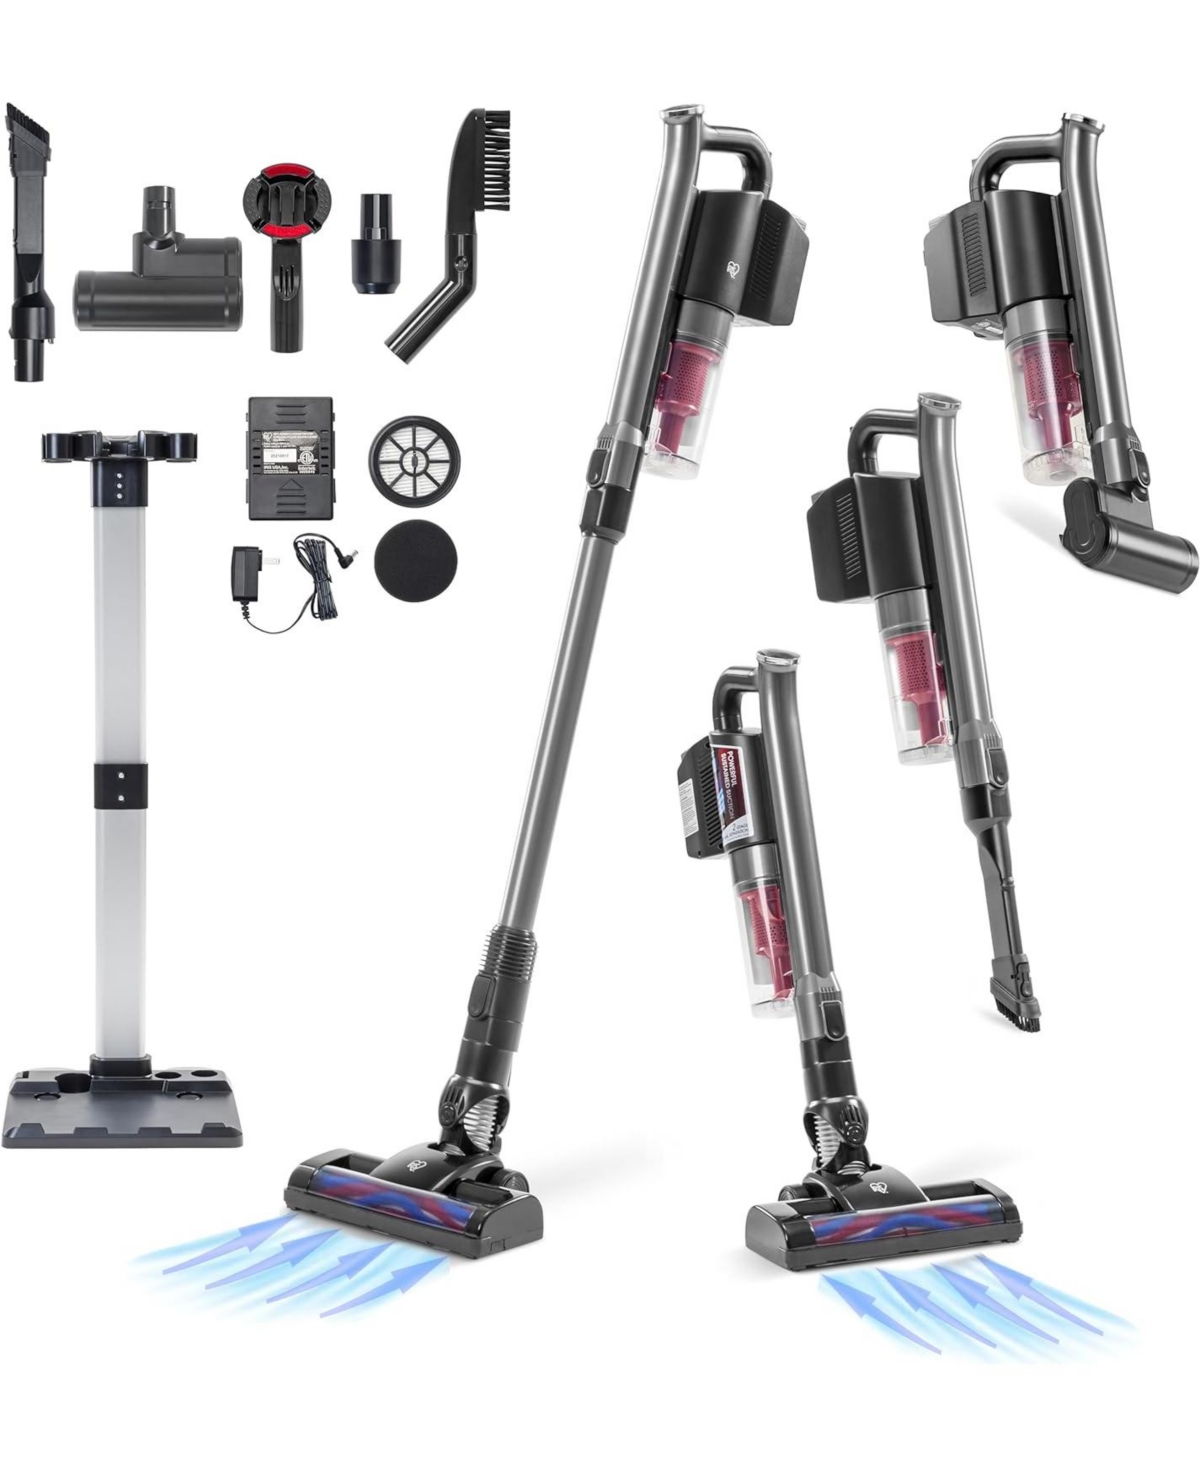 Power Brush Cordless Stick Vacuum for Low-profile Carpet Rugs and Hard Floors, Stand and 6-in-1 Attachments, 9000Pa Suction Led Indicator, 60